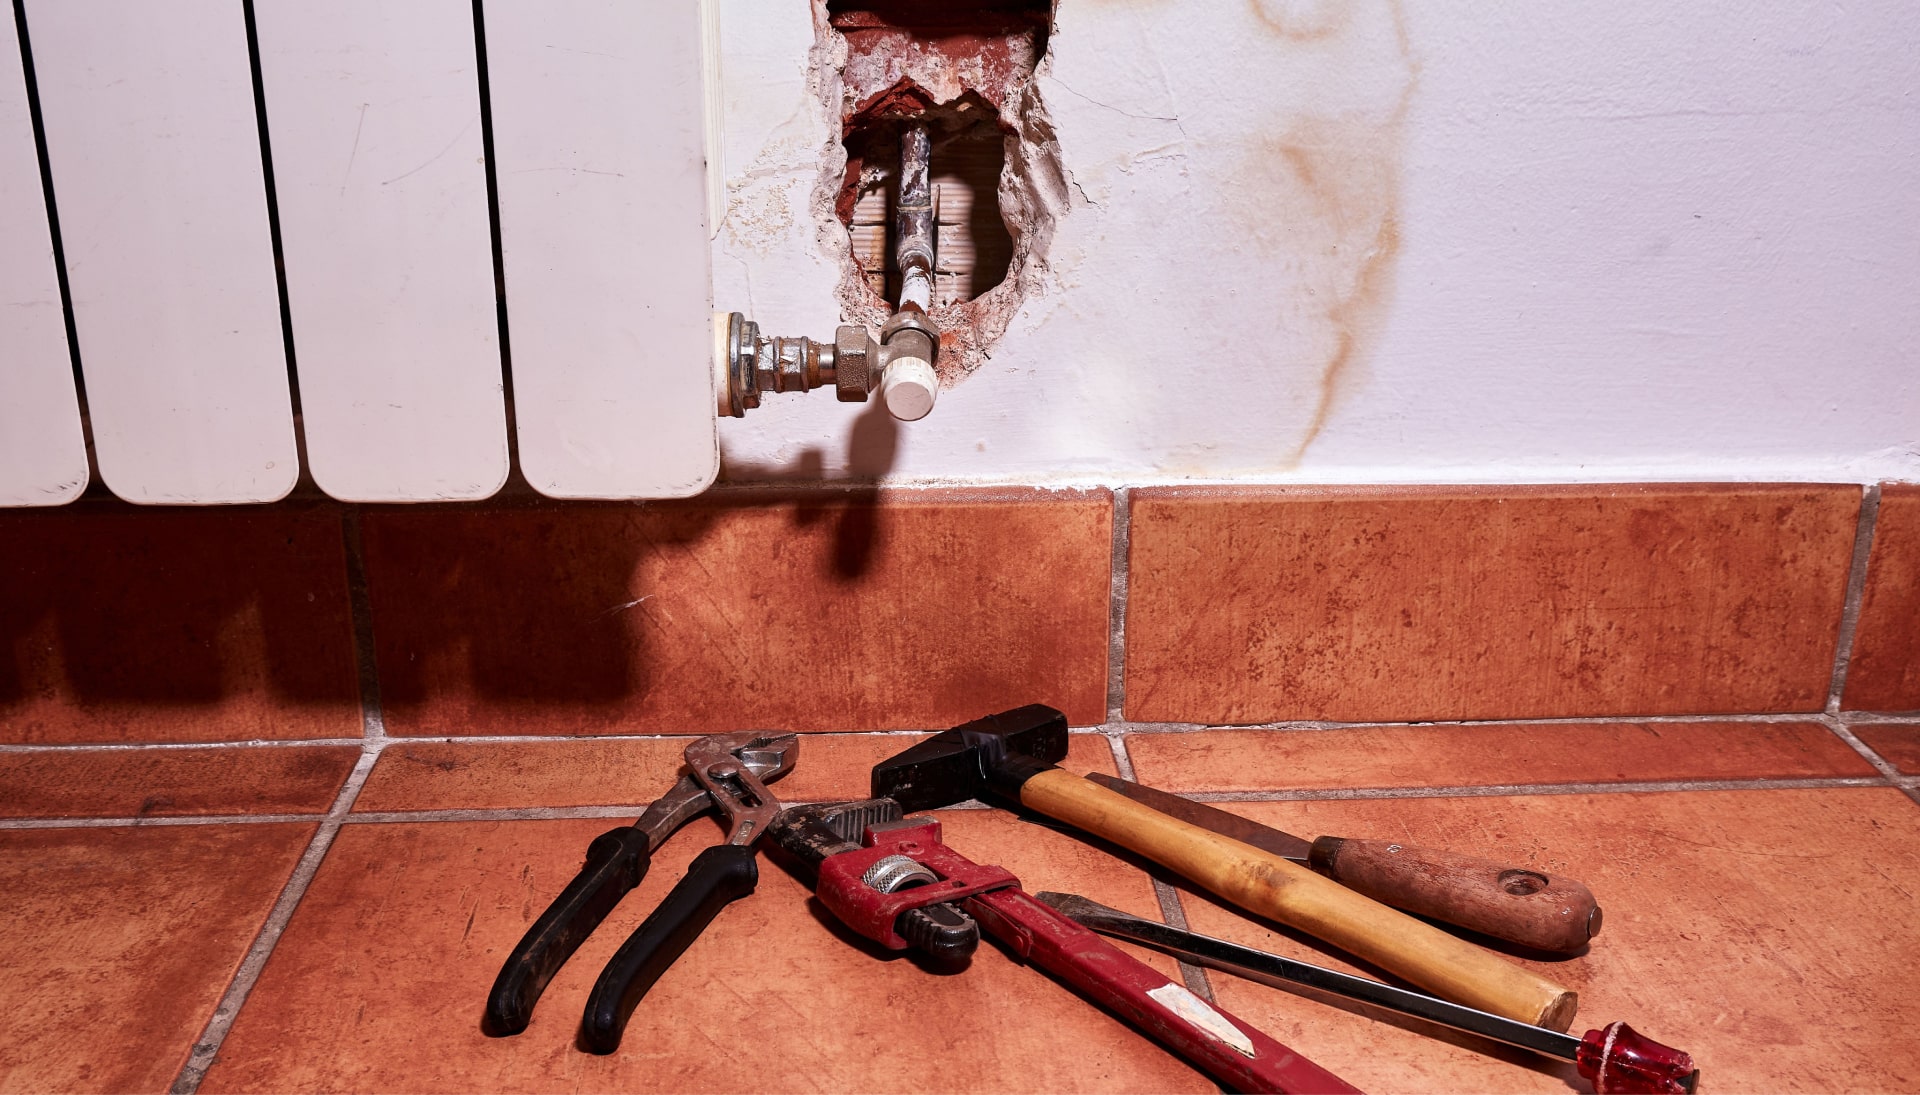 Water damage cleanup tools in Corpus Christi, TX home.